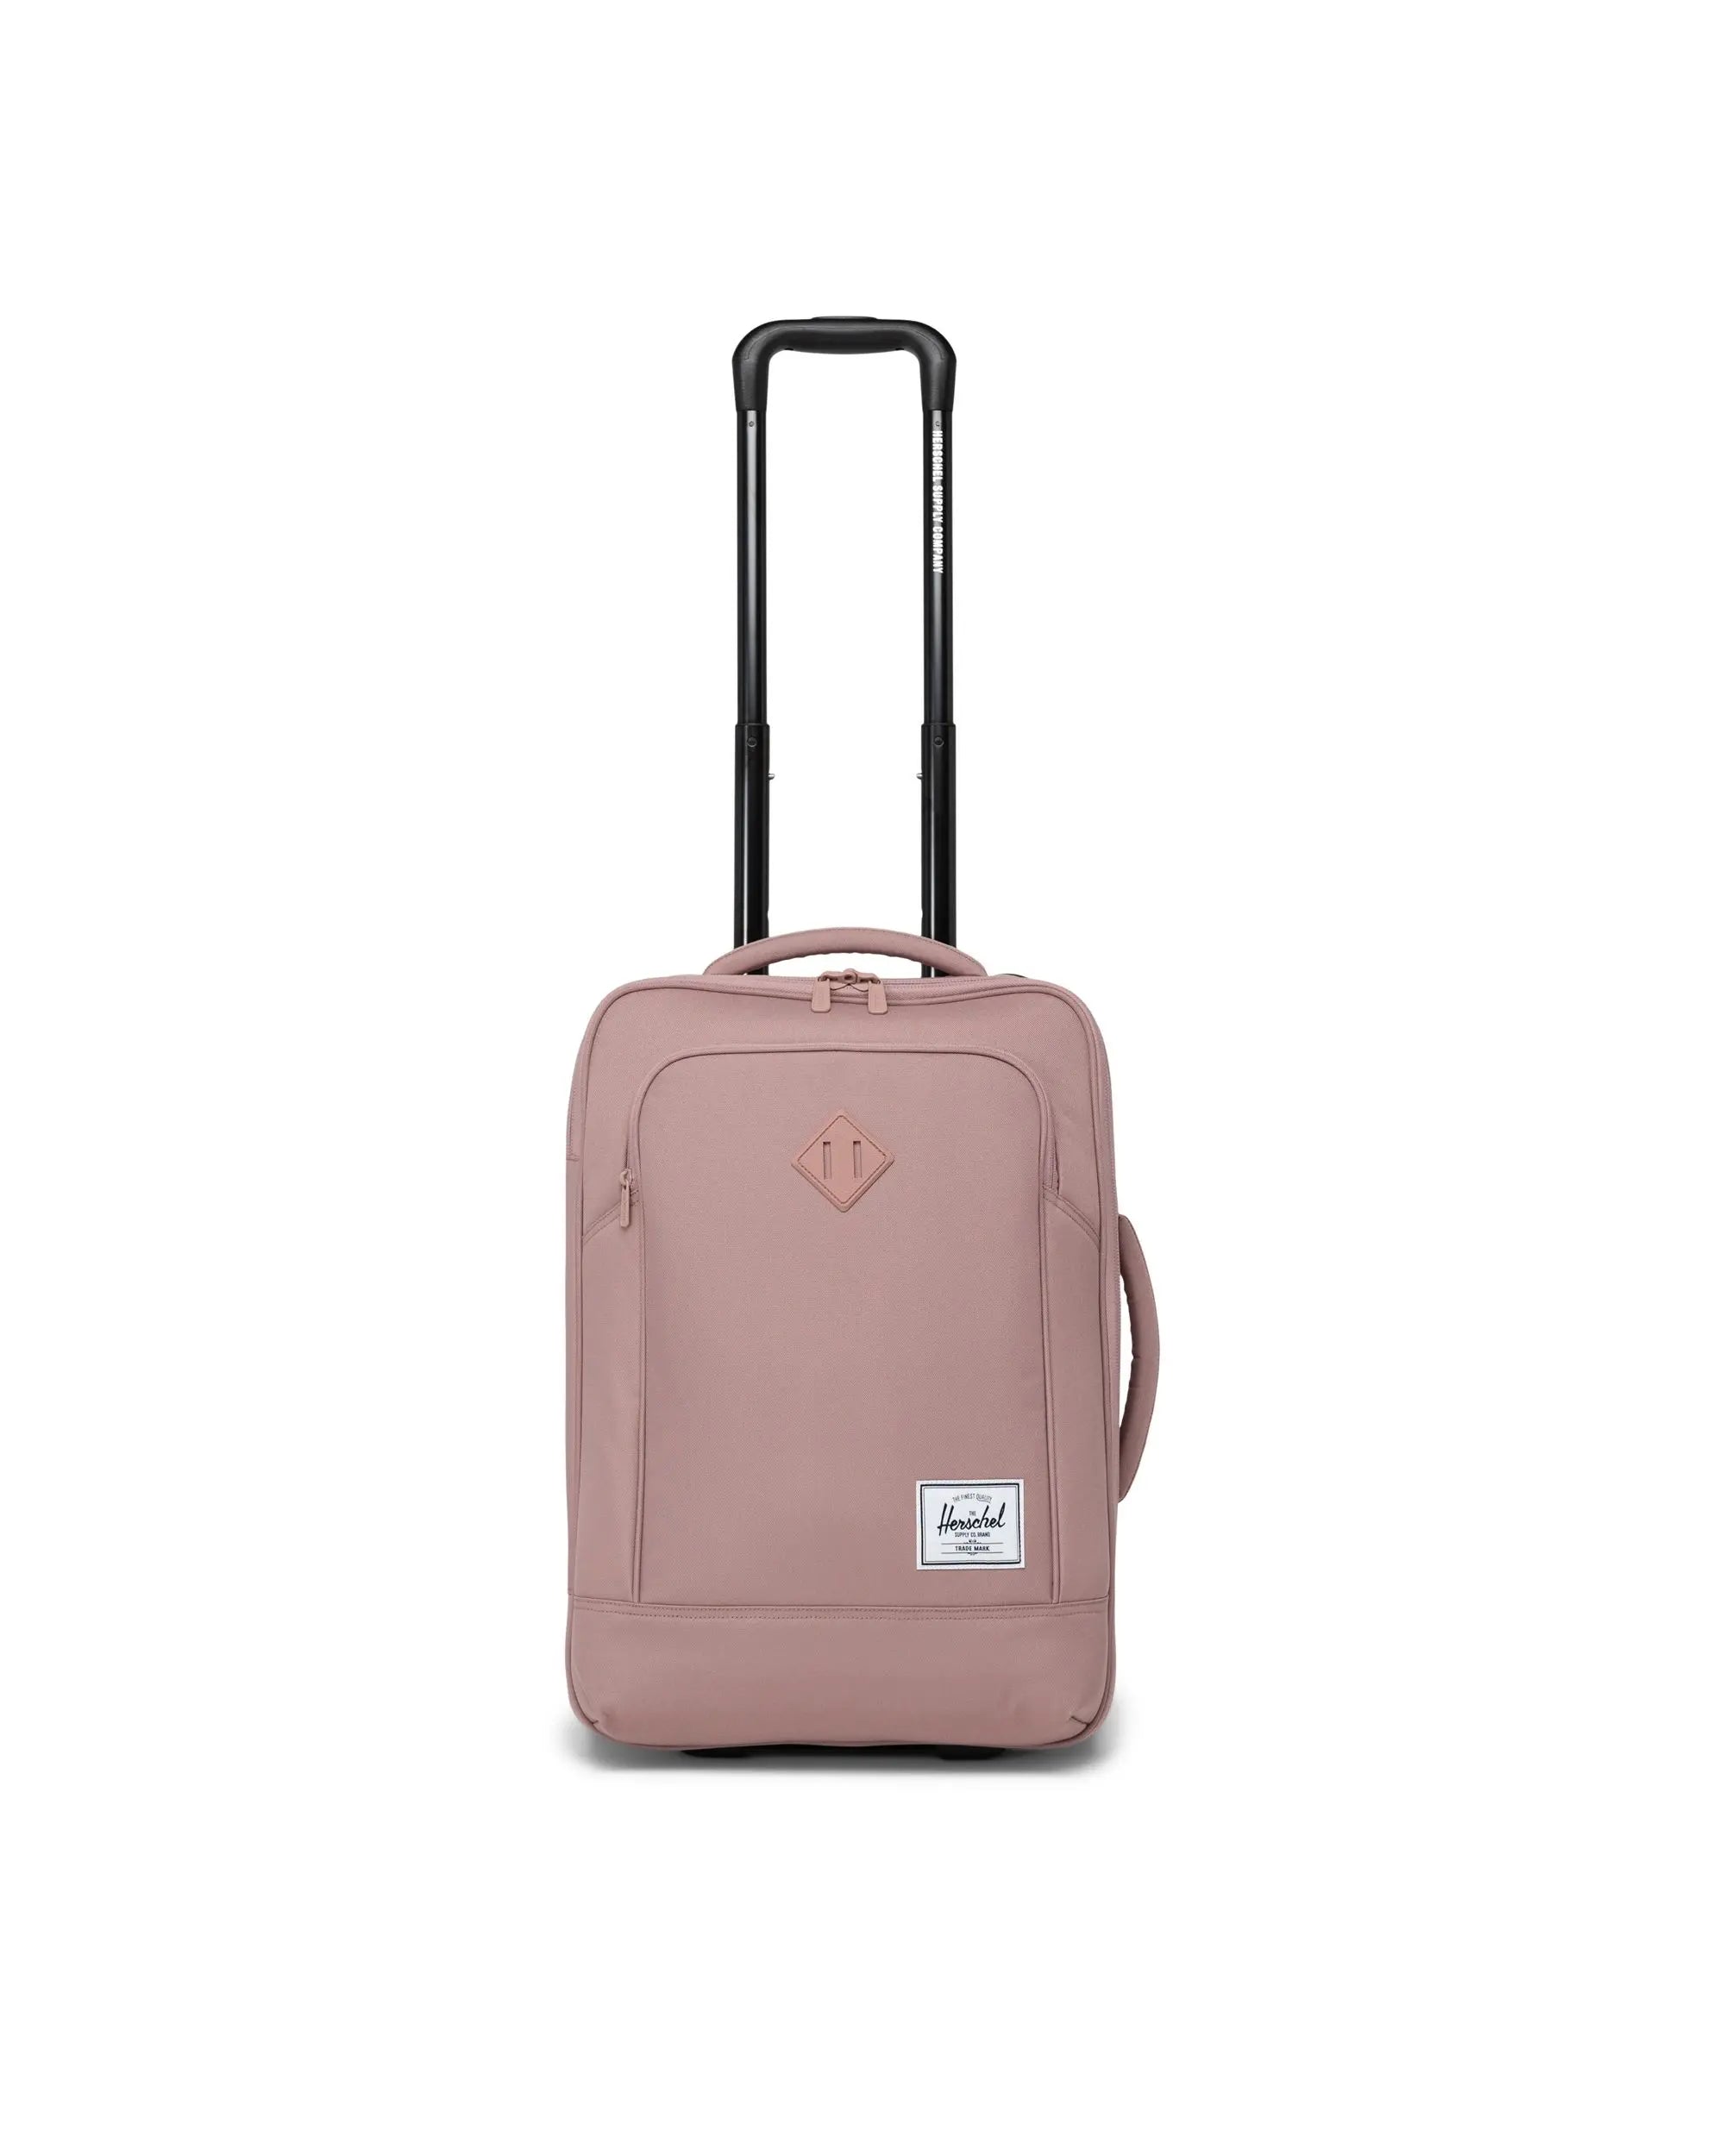 Herschel Heritage™ Softshell Large Carry On Luggage - 02077